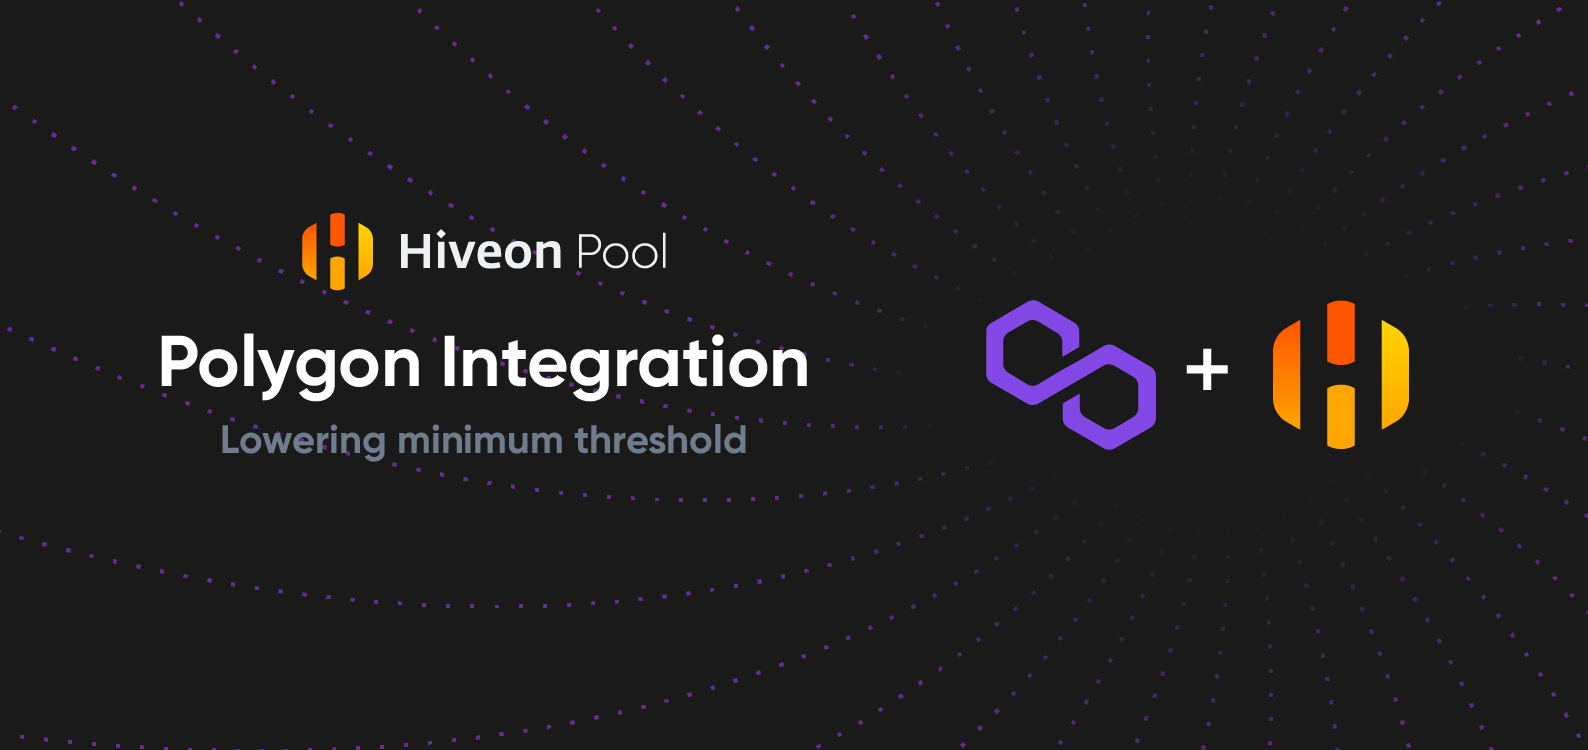 HiveOS — Polygon Integration and manual payout options have been added